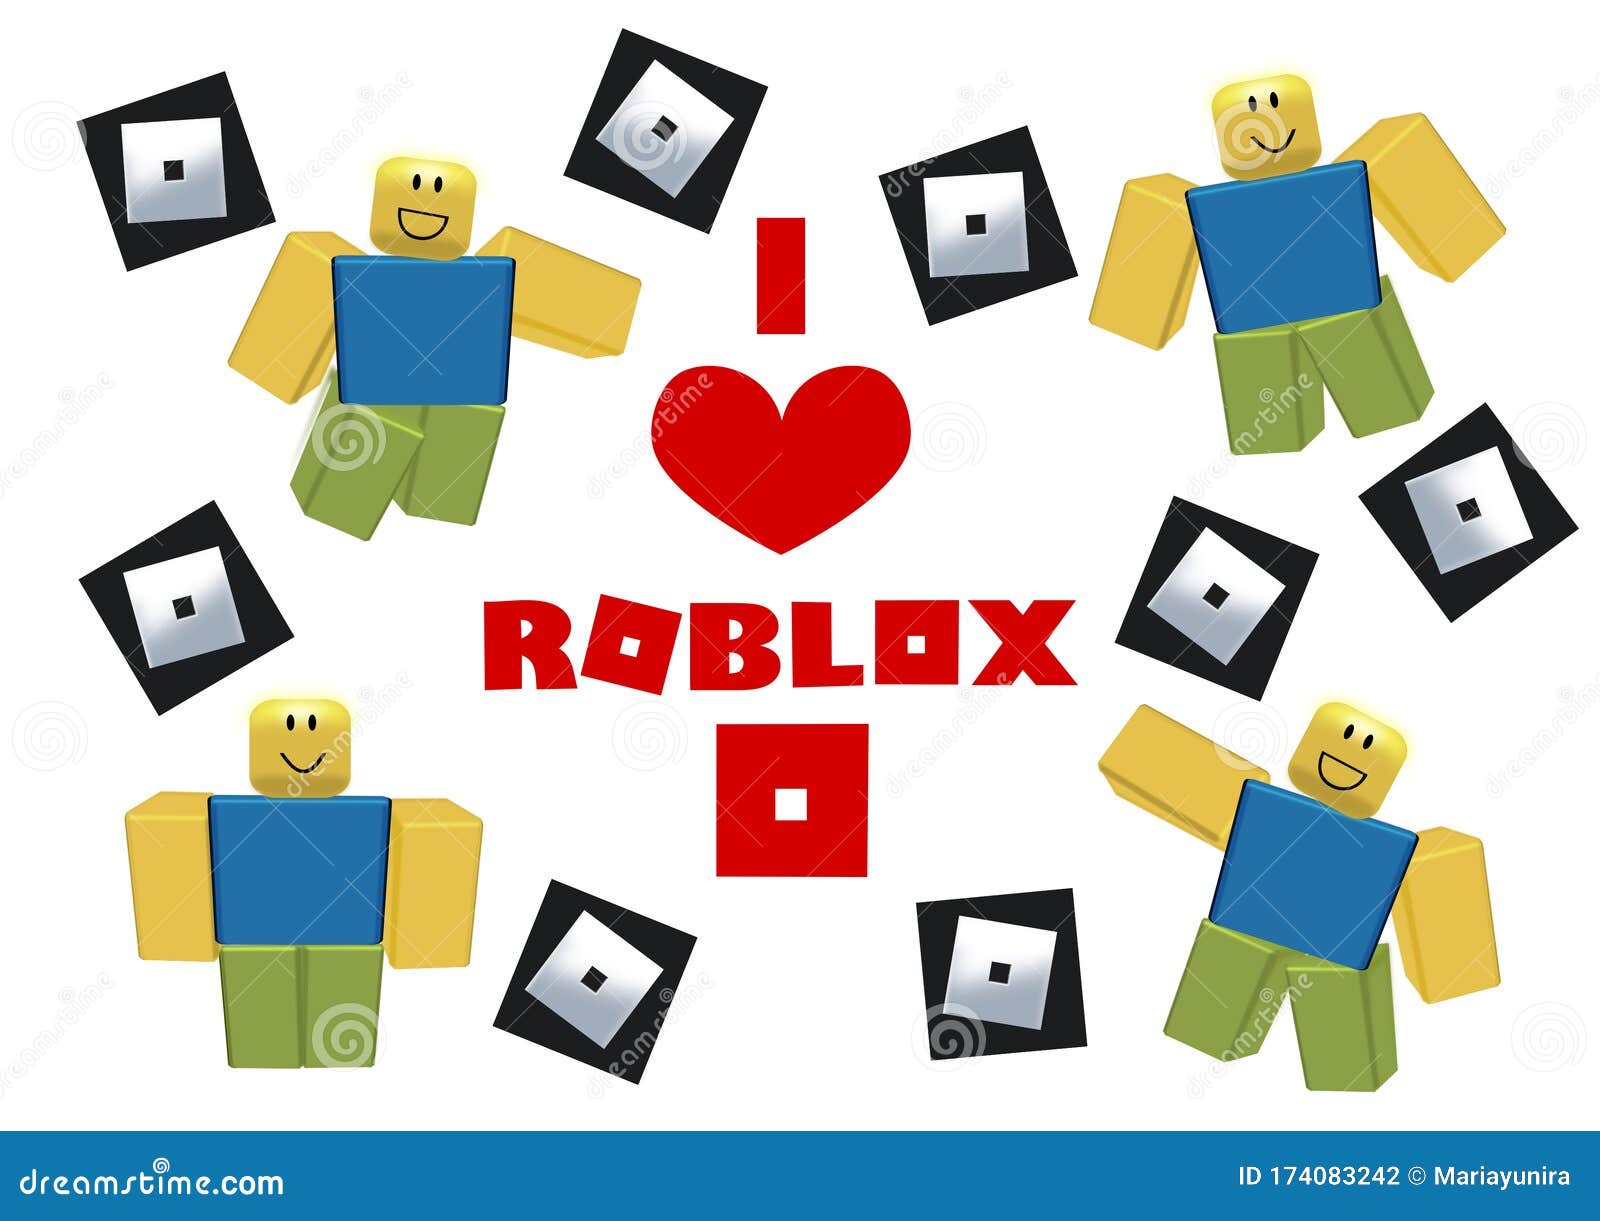 Roblox Logo And Character Editorial Photography Illustration Of Game 174083242 - picture of the roblox logo